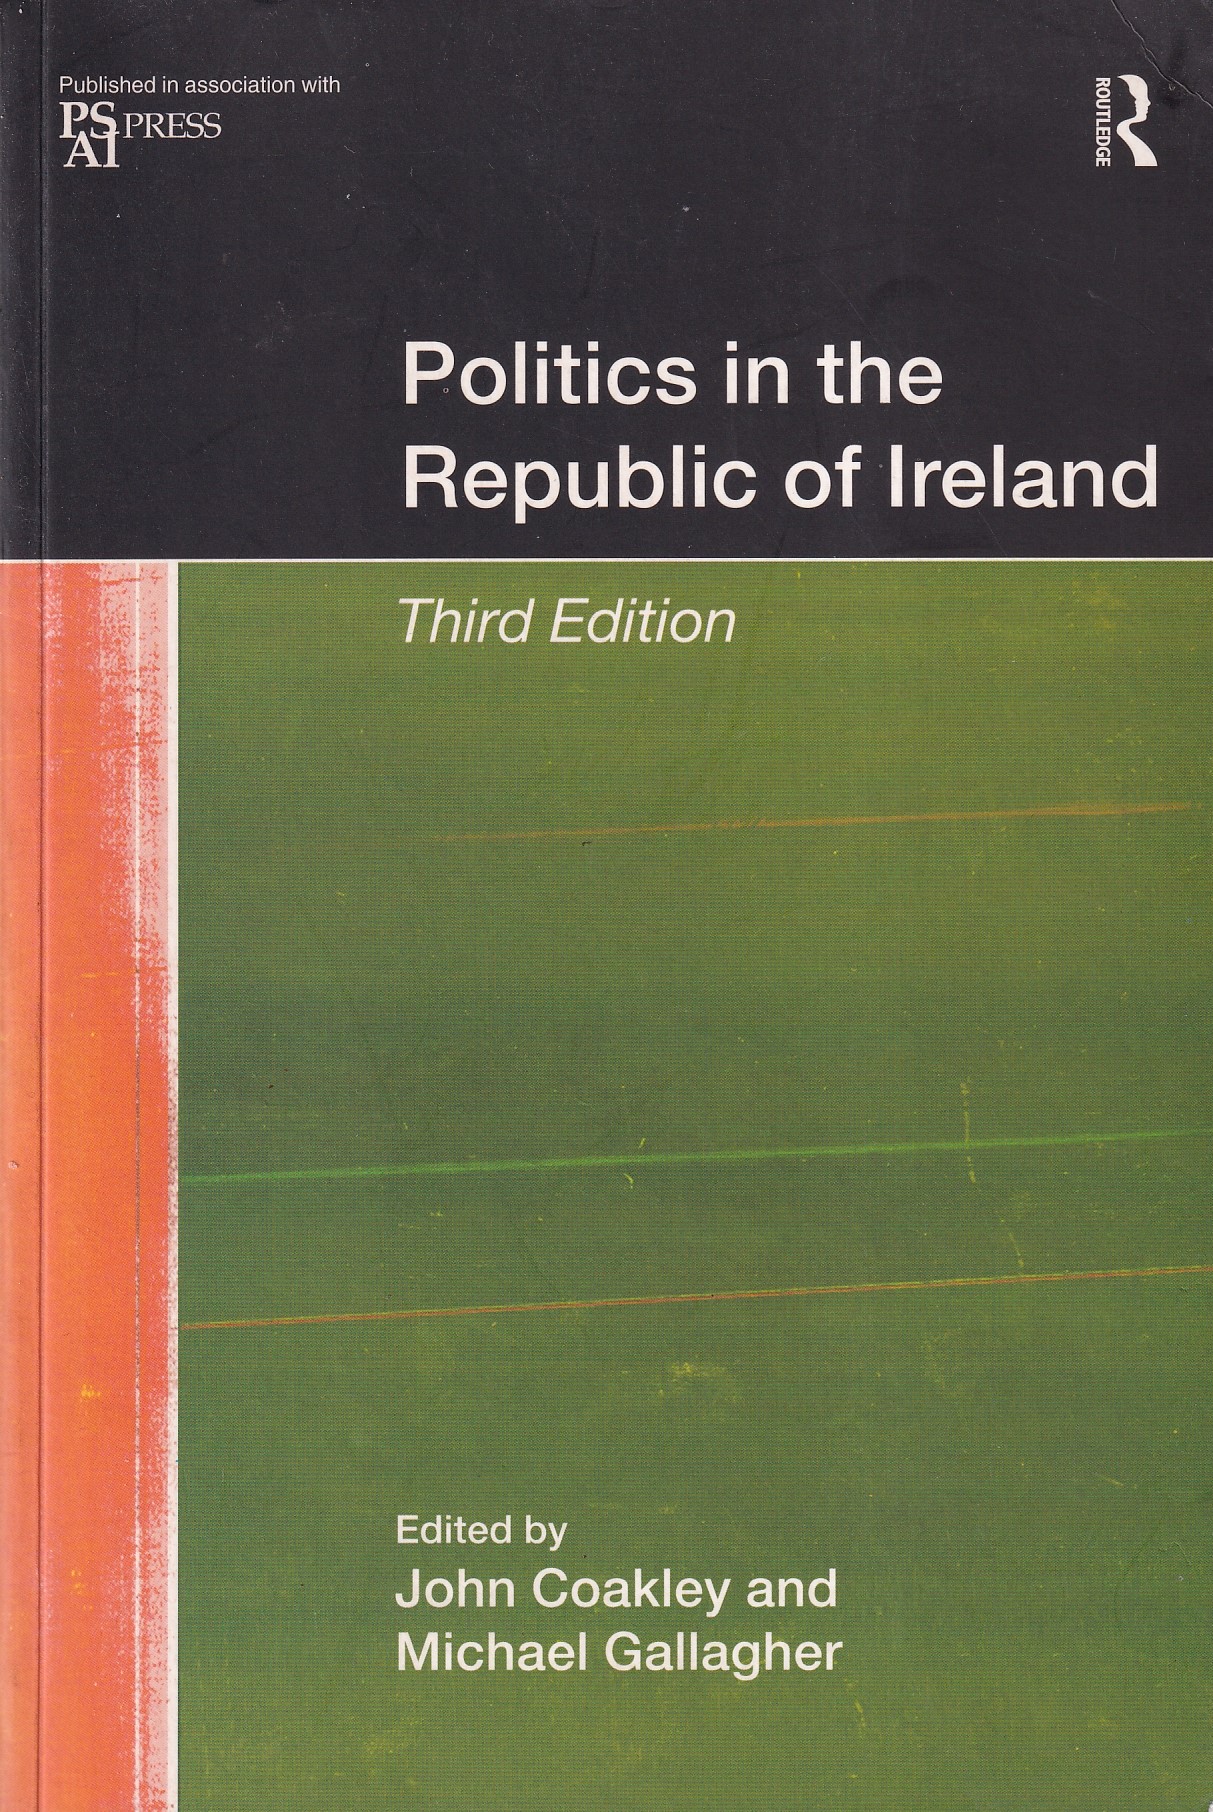 Politics in the Republic of Ireland | John Coakley & Michael Gallagher (eds.) | Charlie Byrne's